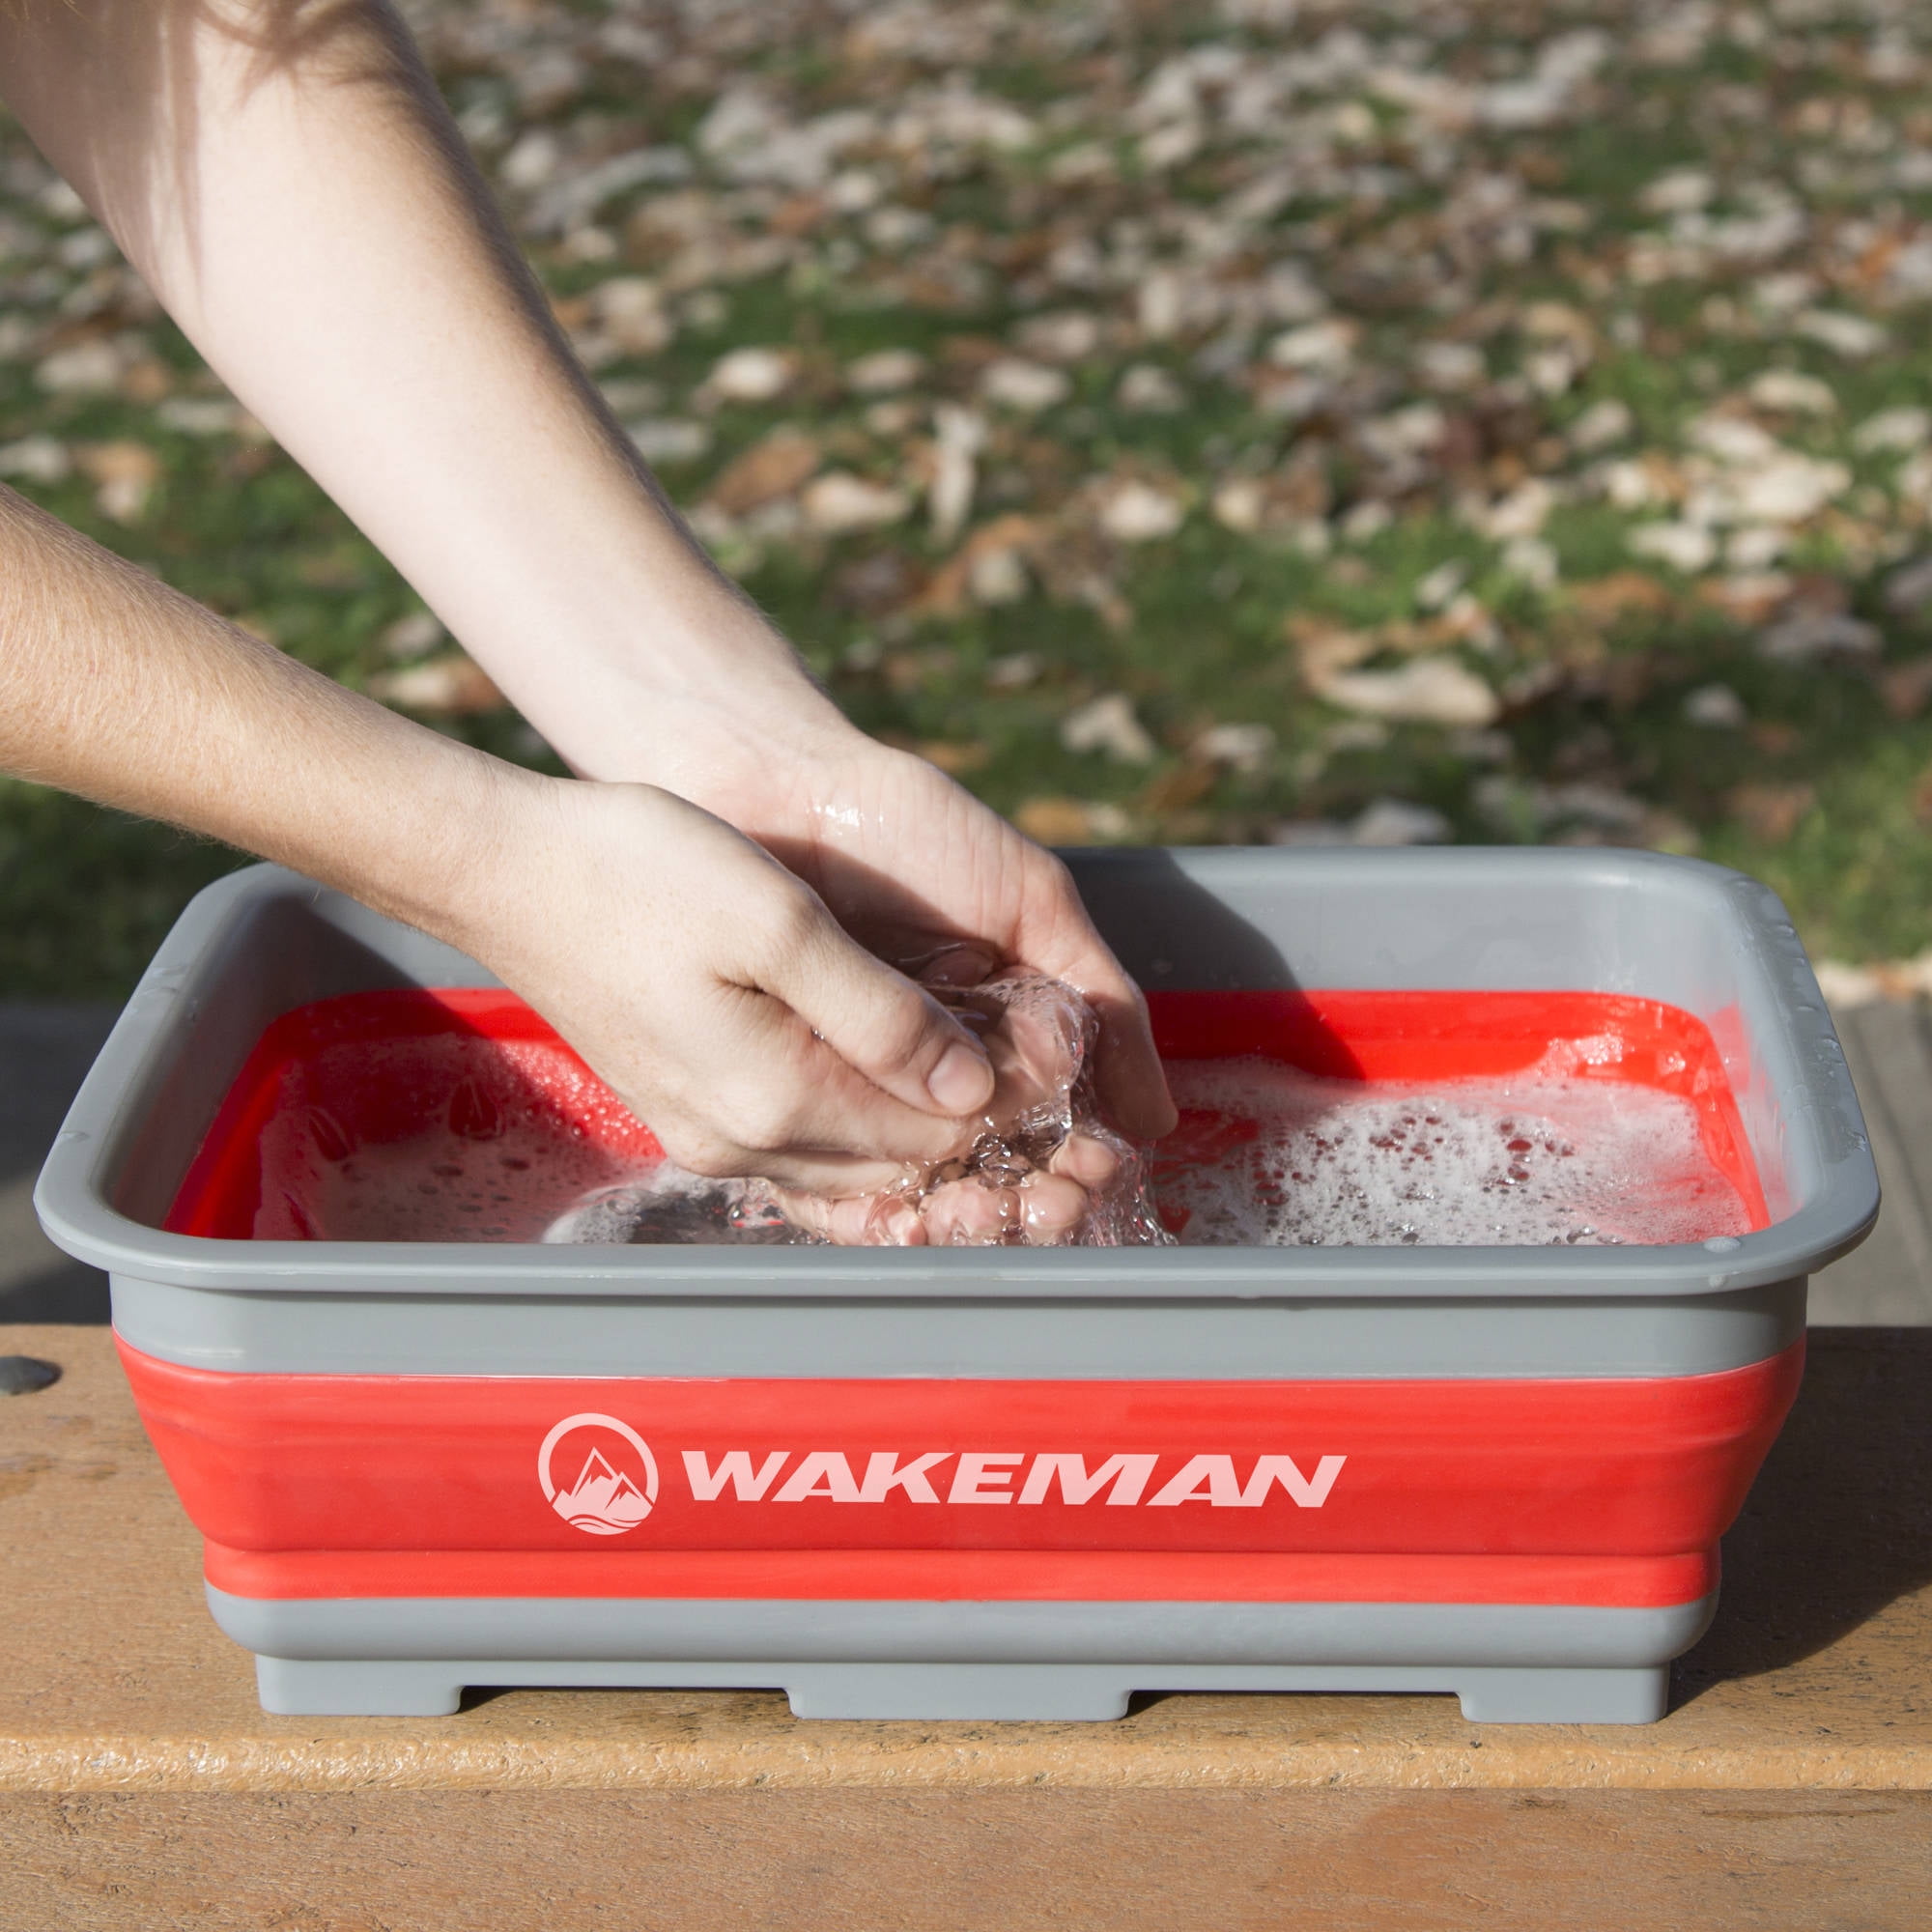 Wakeman Outdoors Collapsible Multiuse Wash Bin Portable Wash Basin//Dish Tub//Ice Bucket with 10 L Capacity for Camping